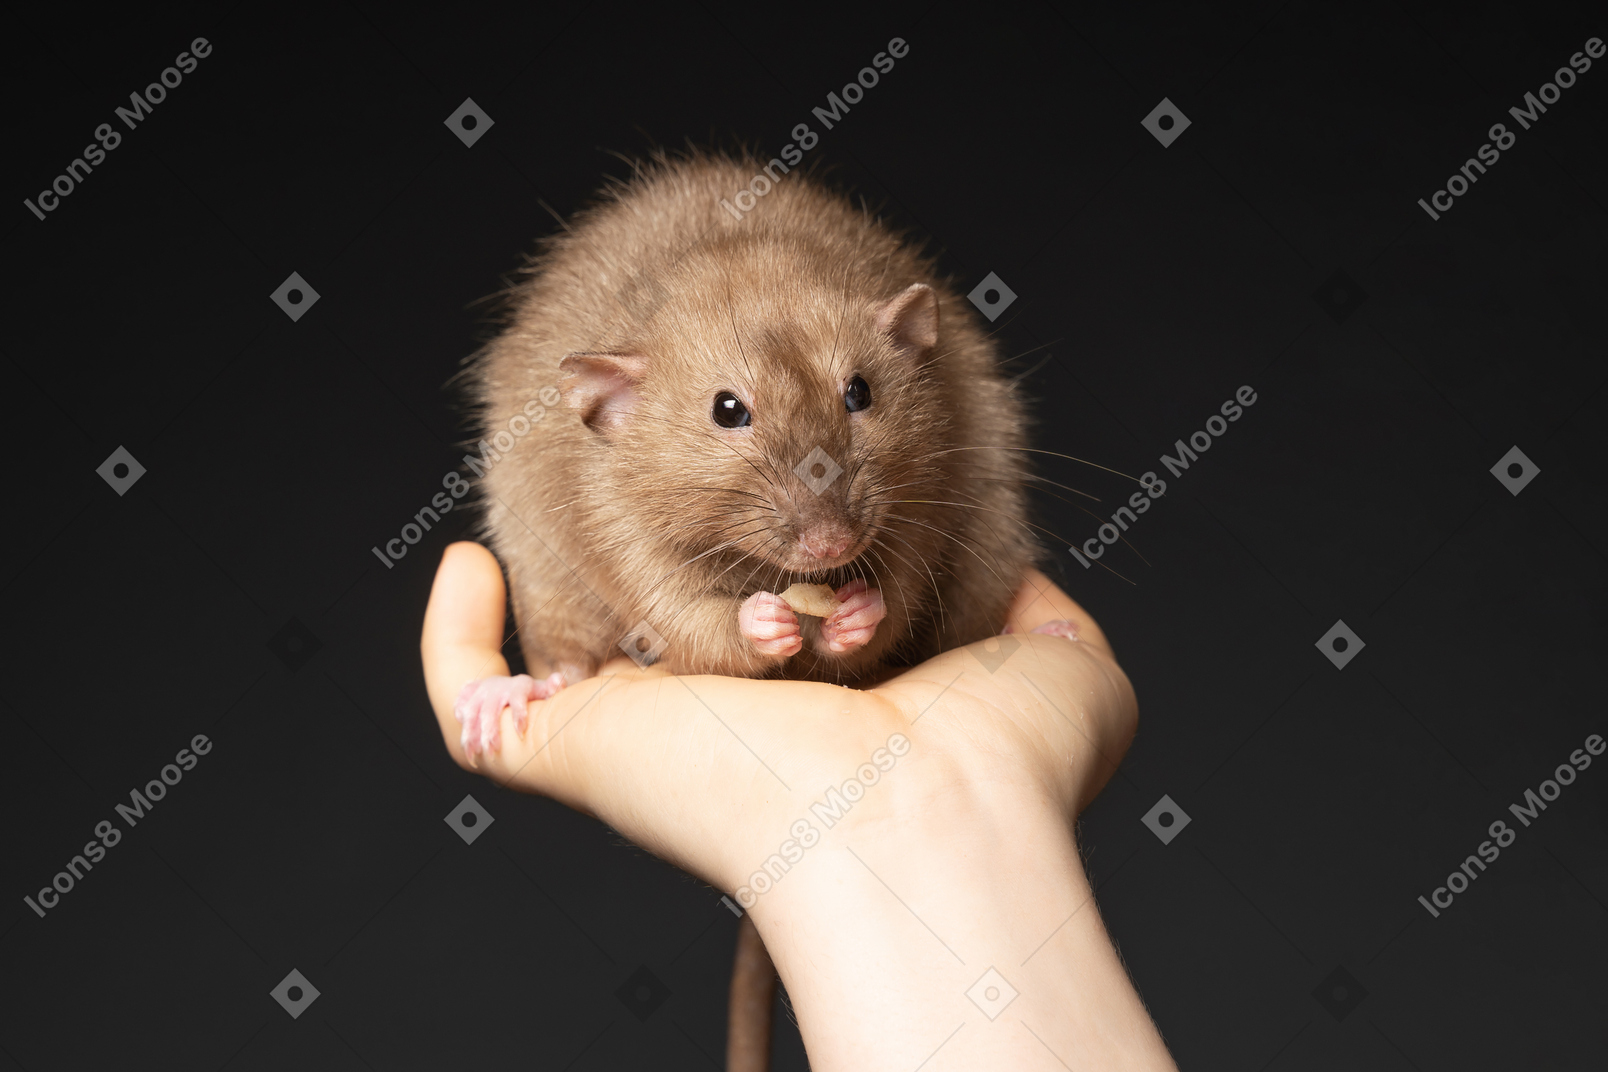 Cute gray mouse eating in human hands